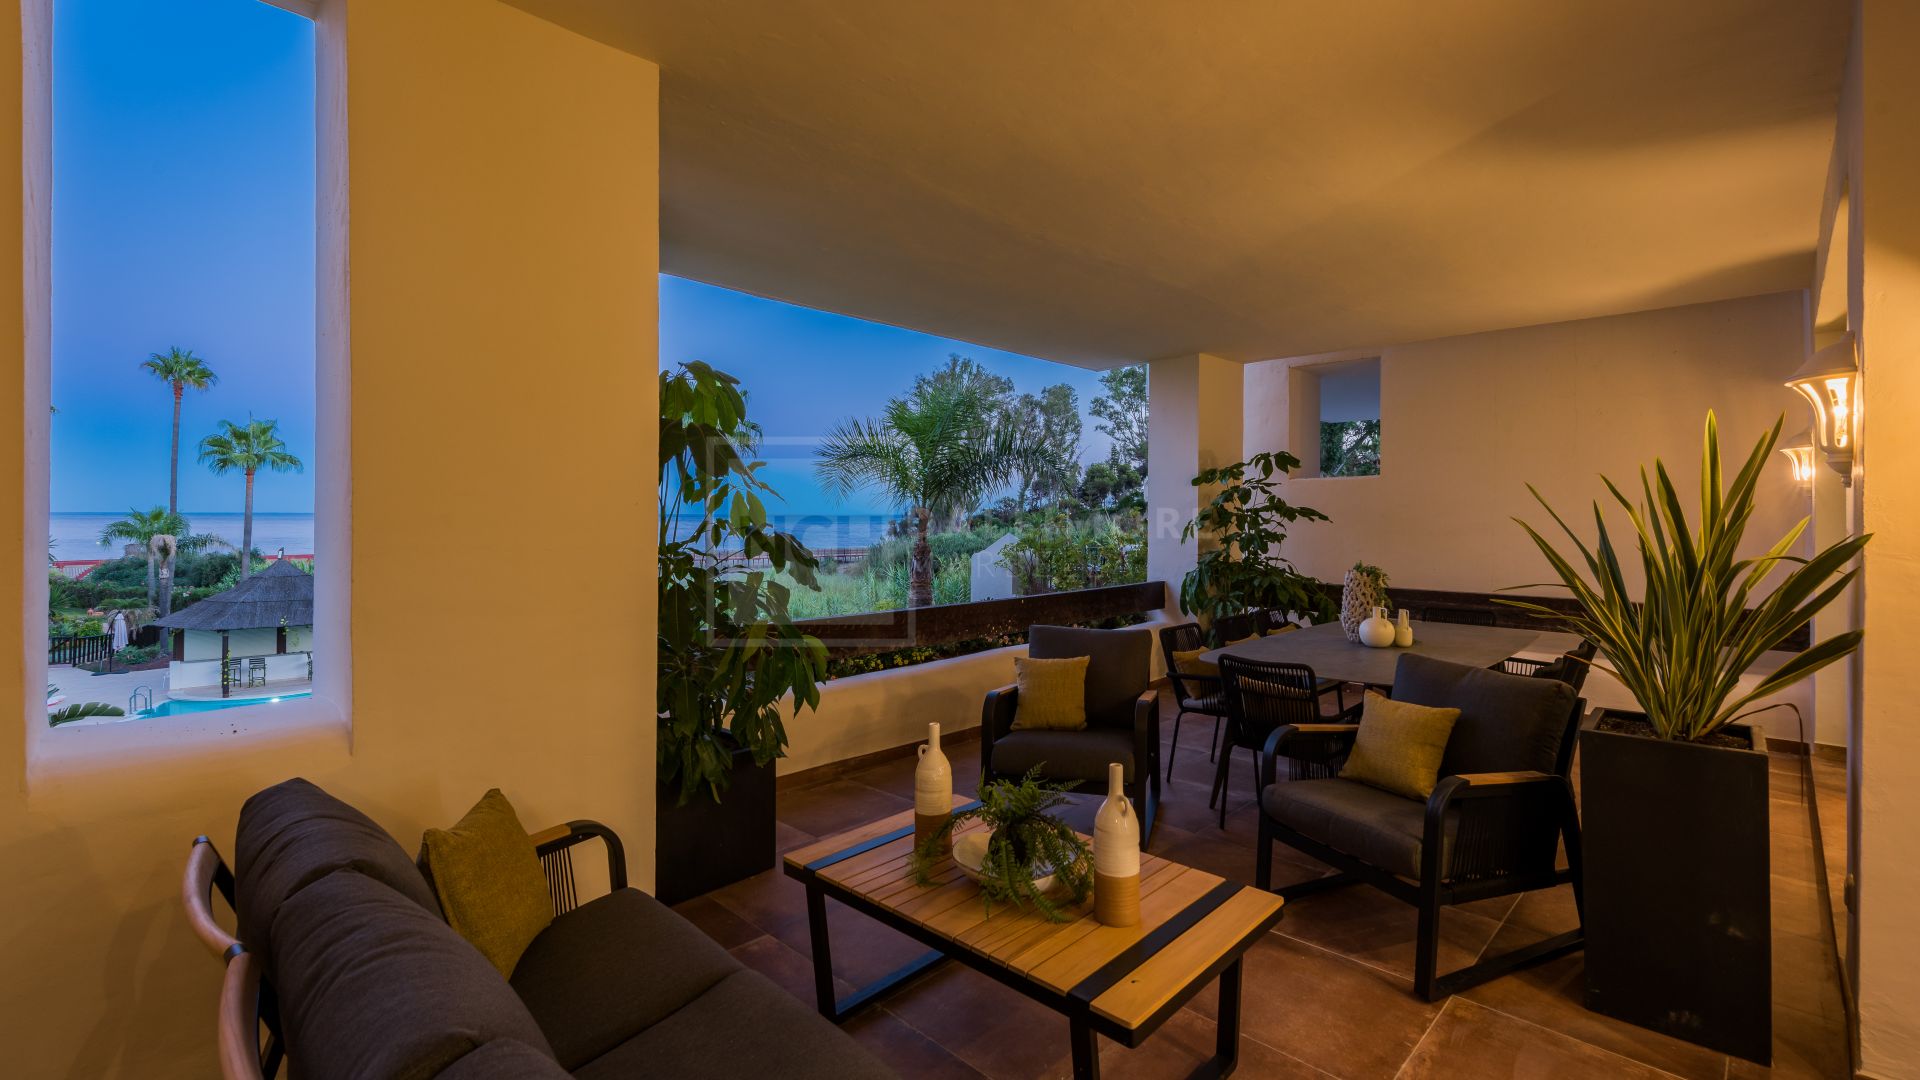 SPECTACULAR FRONTLINE BEACH APARTMENT LOCATED ON THE NEW GOLDEN MILE, ESTEPONA